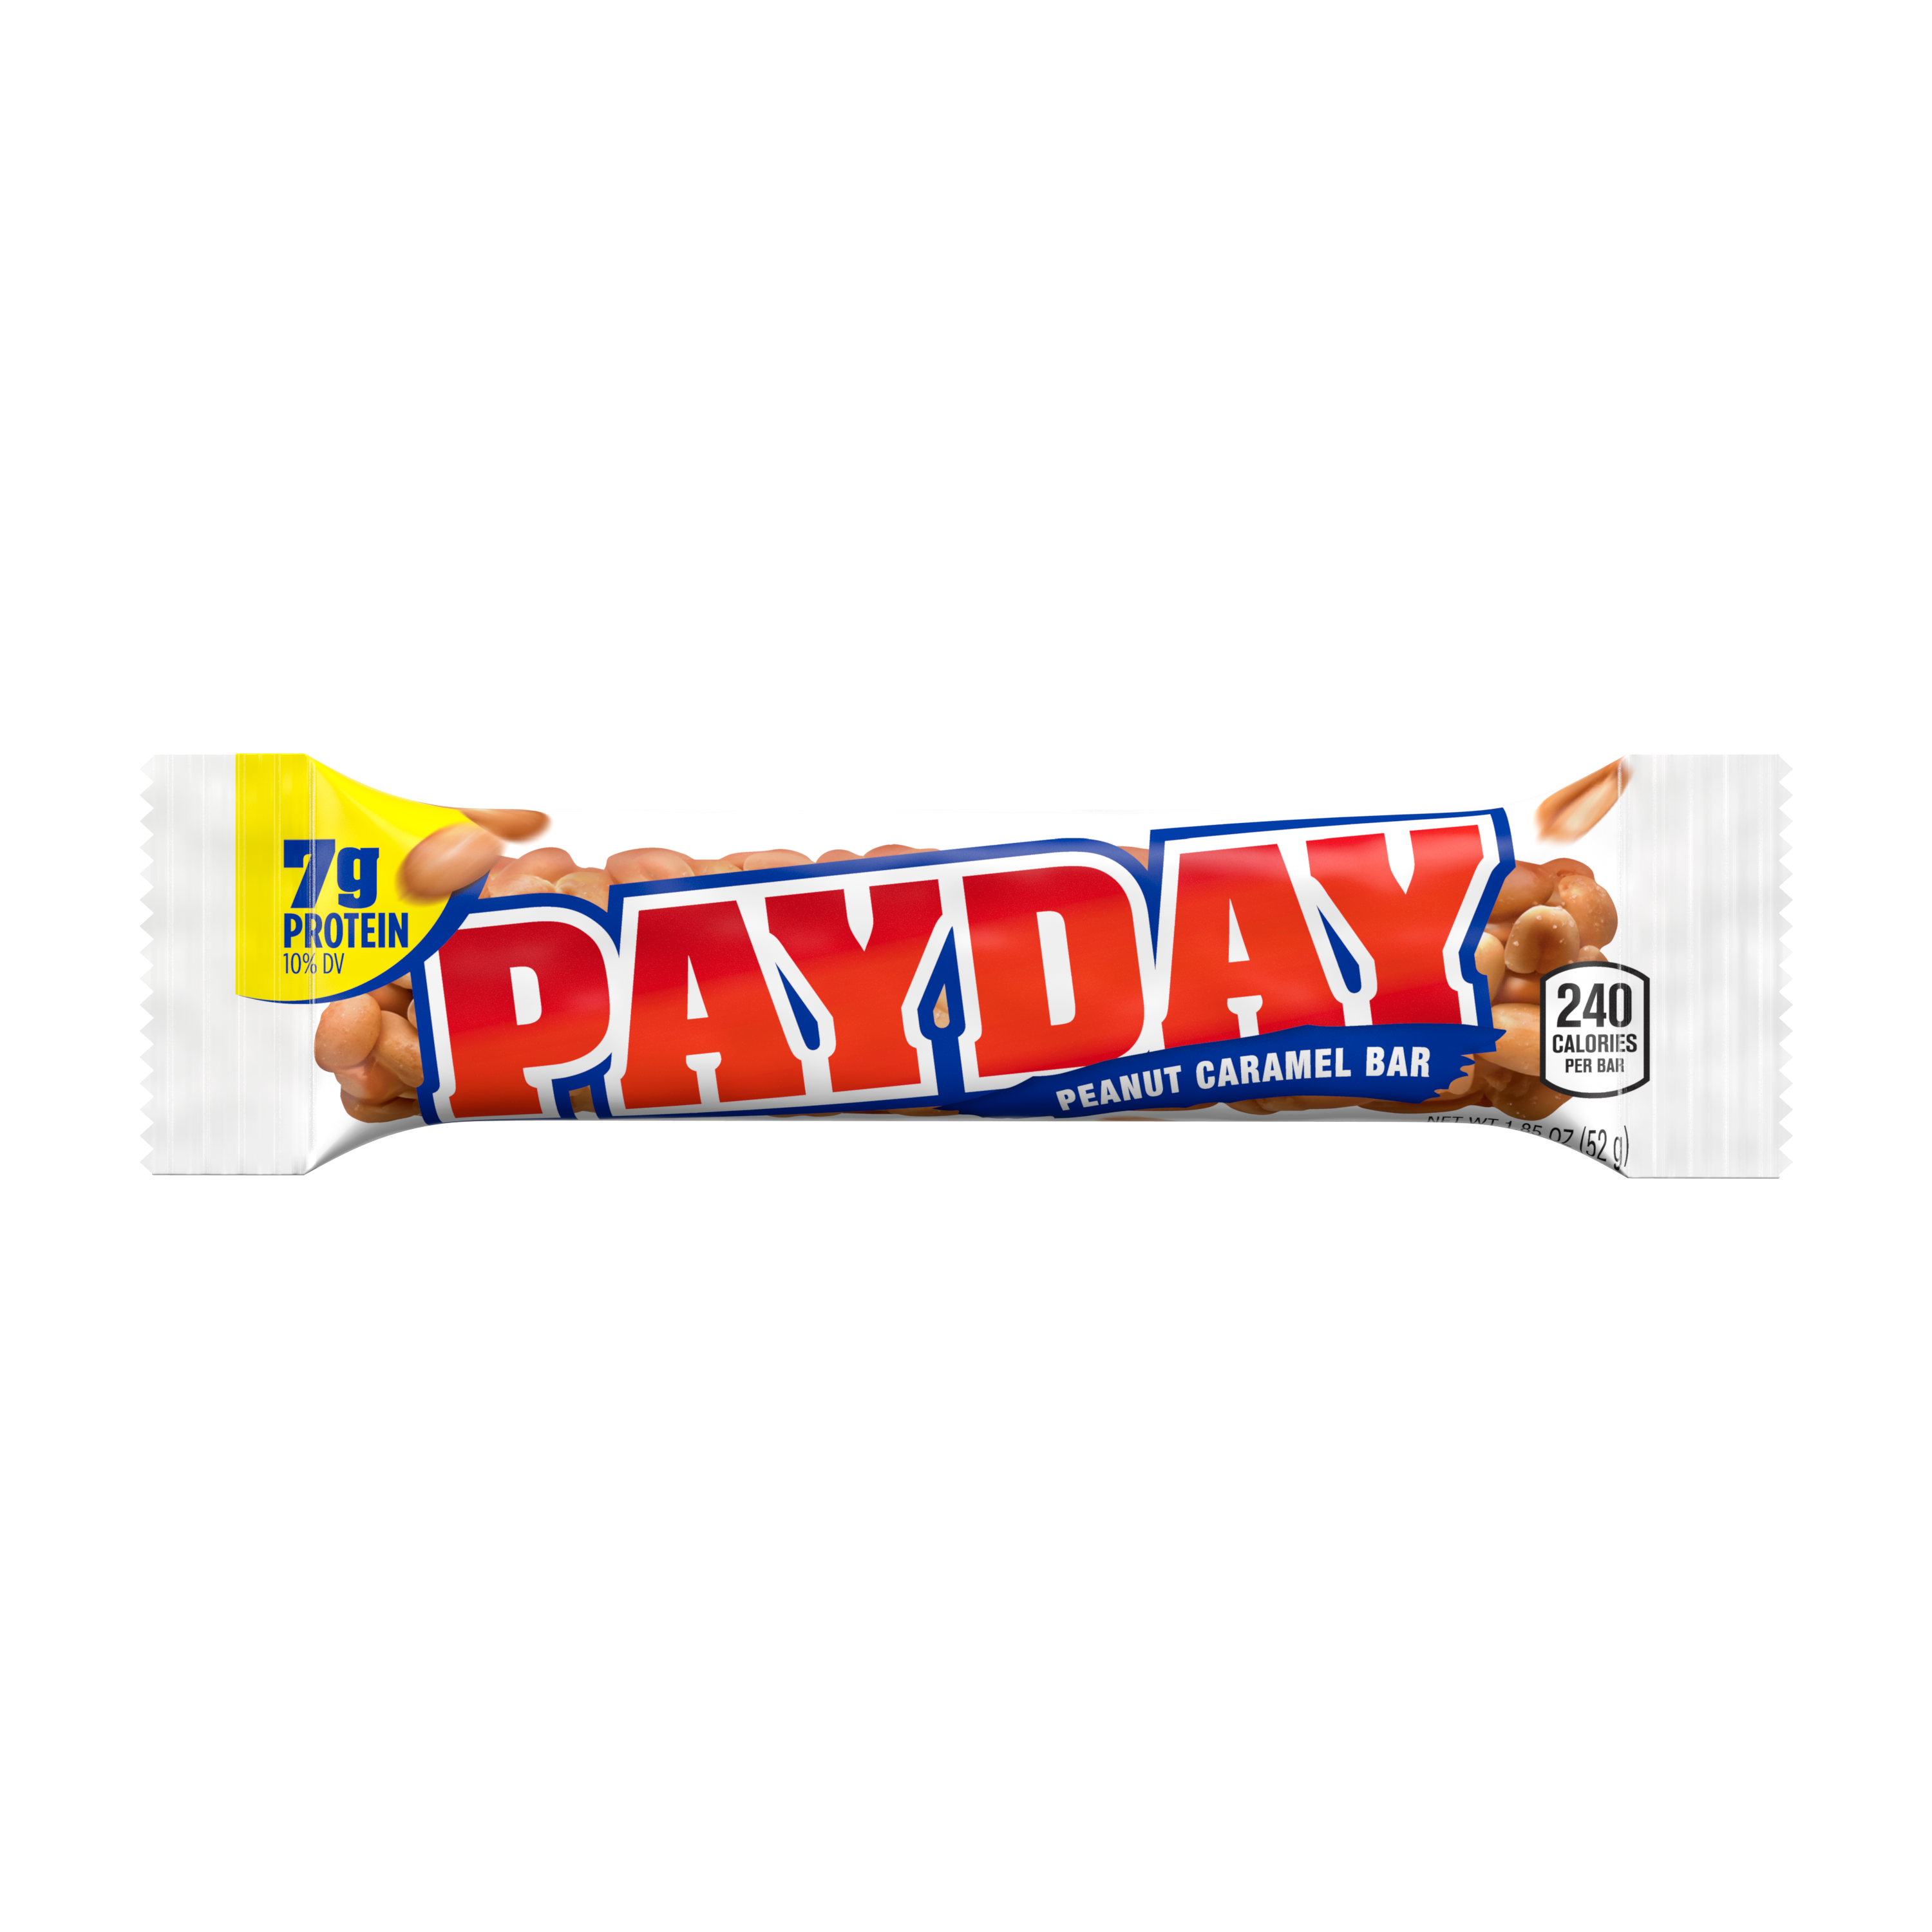 PAYDAY Peanut and Caramel Candy Bar, 1.85 oz - Front of Package